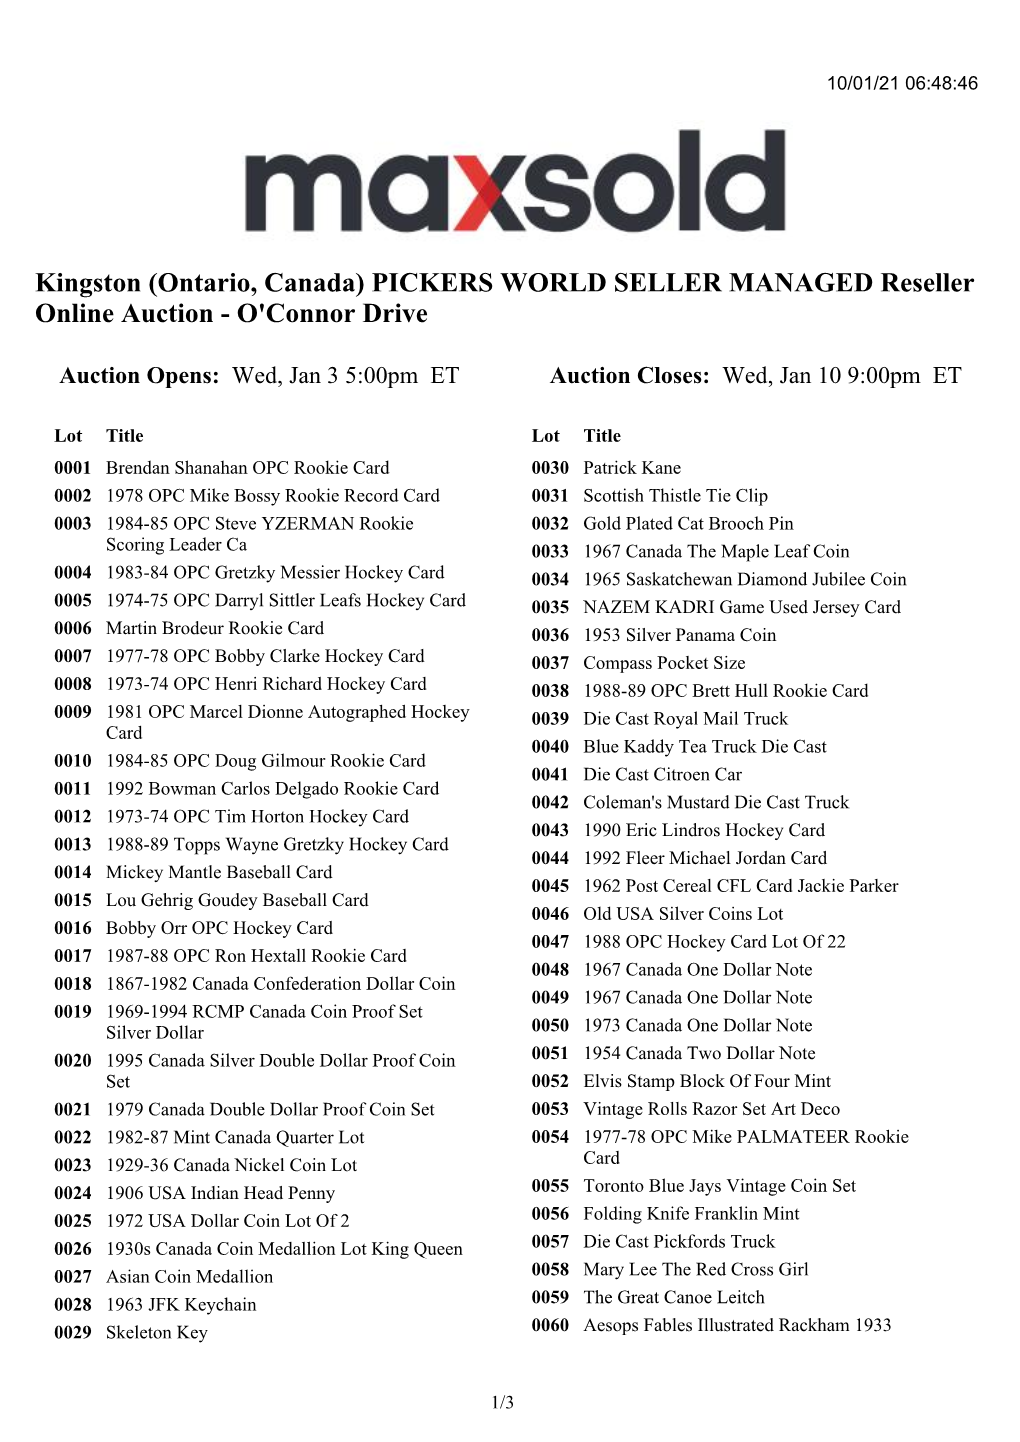 Kingston (Ontario, Canada) PICKERS WORLD SELLER MANAGED Reseller Online Auction - O'connor Drive